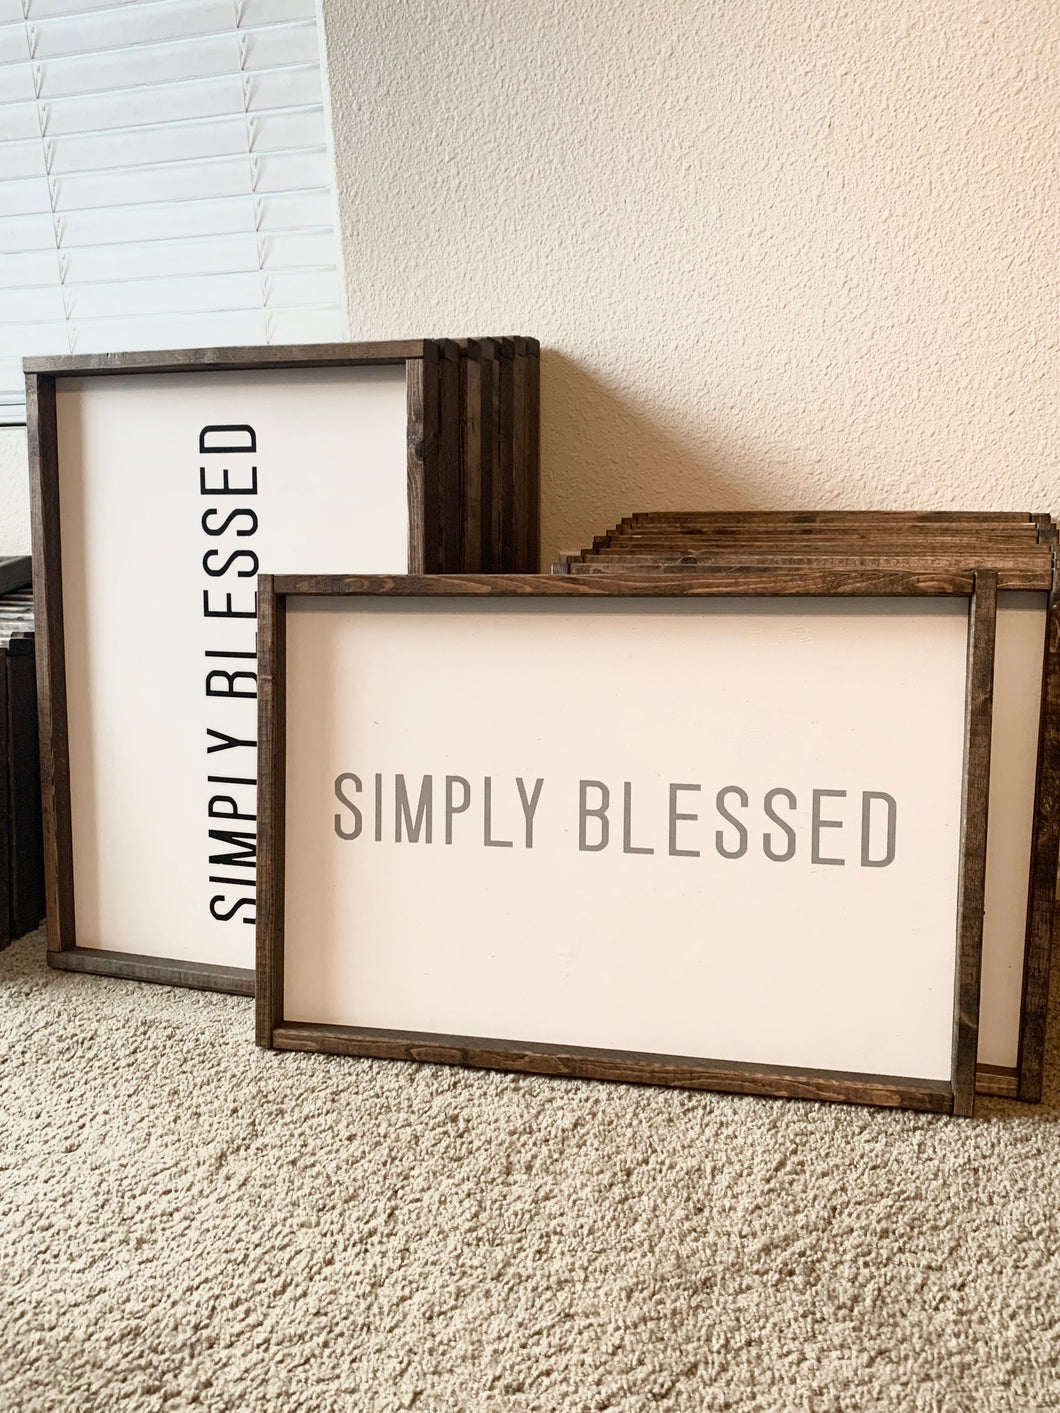 Simply blessed | Framed wood sign